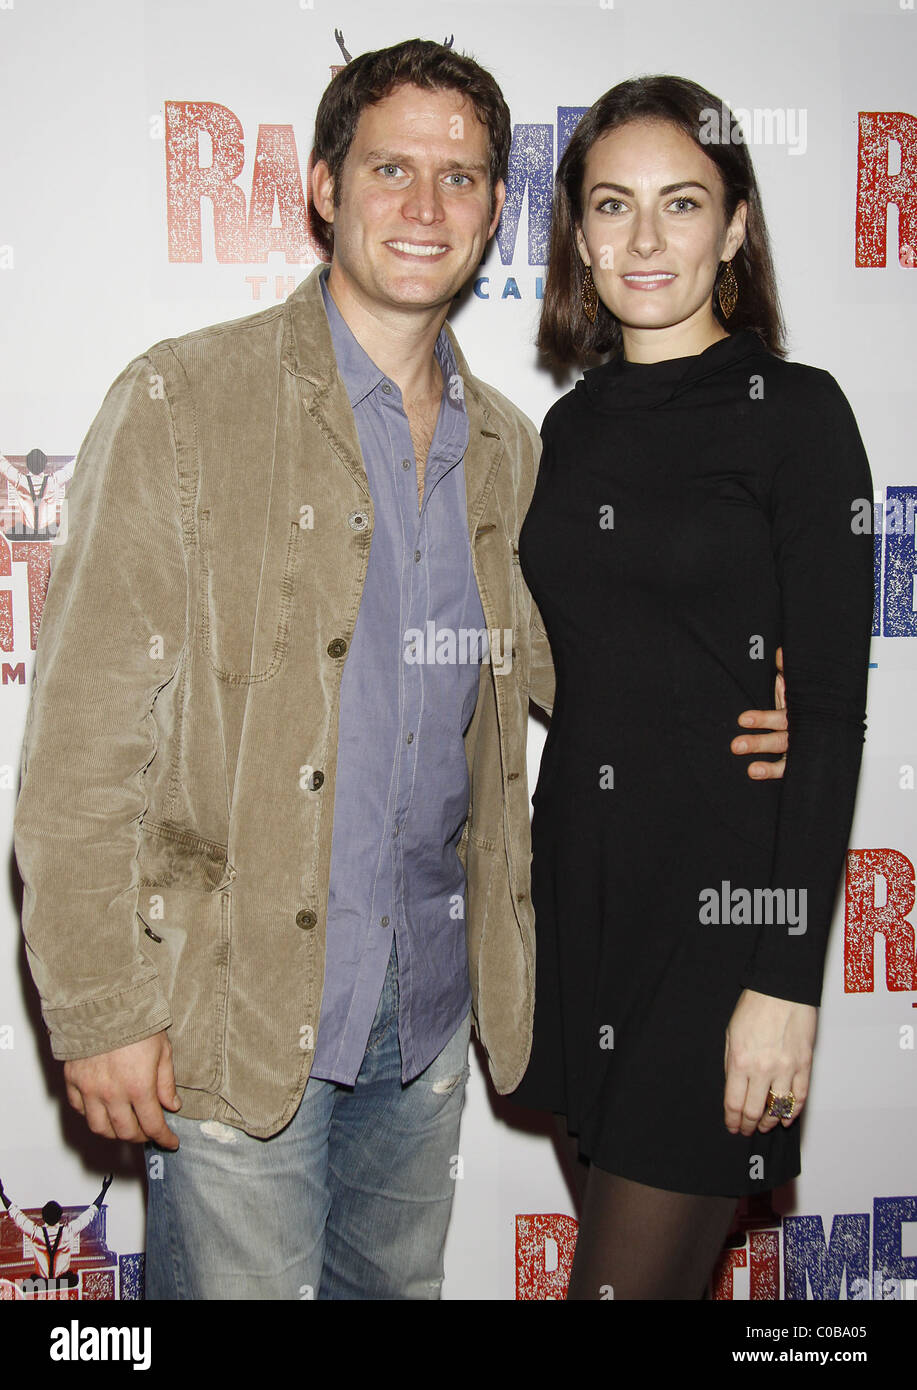 Steven Pasquale and Laura Benanti Opening night of the Broadway musical 'Ragtime' at the Neil Simon Theatre - Arrivals New York Stock Photo